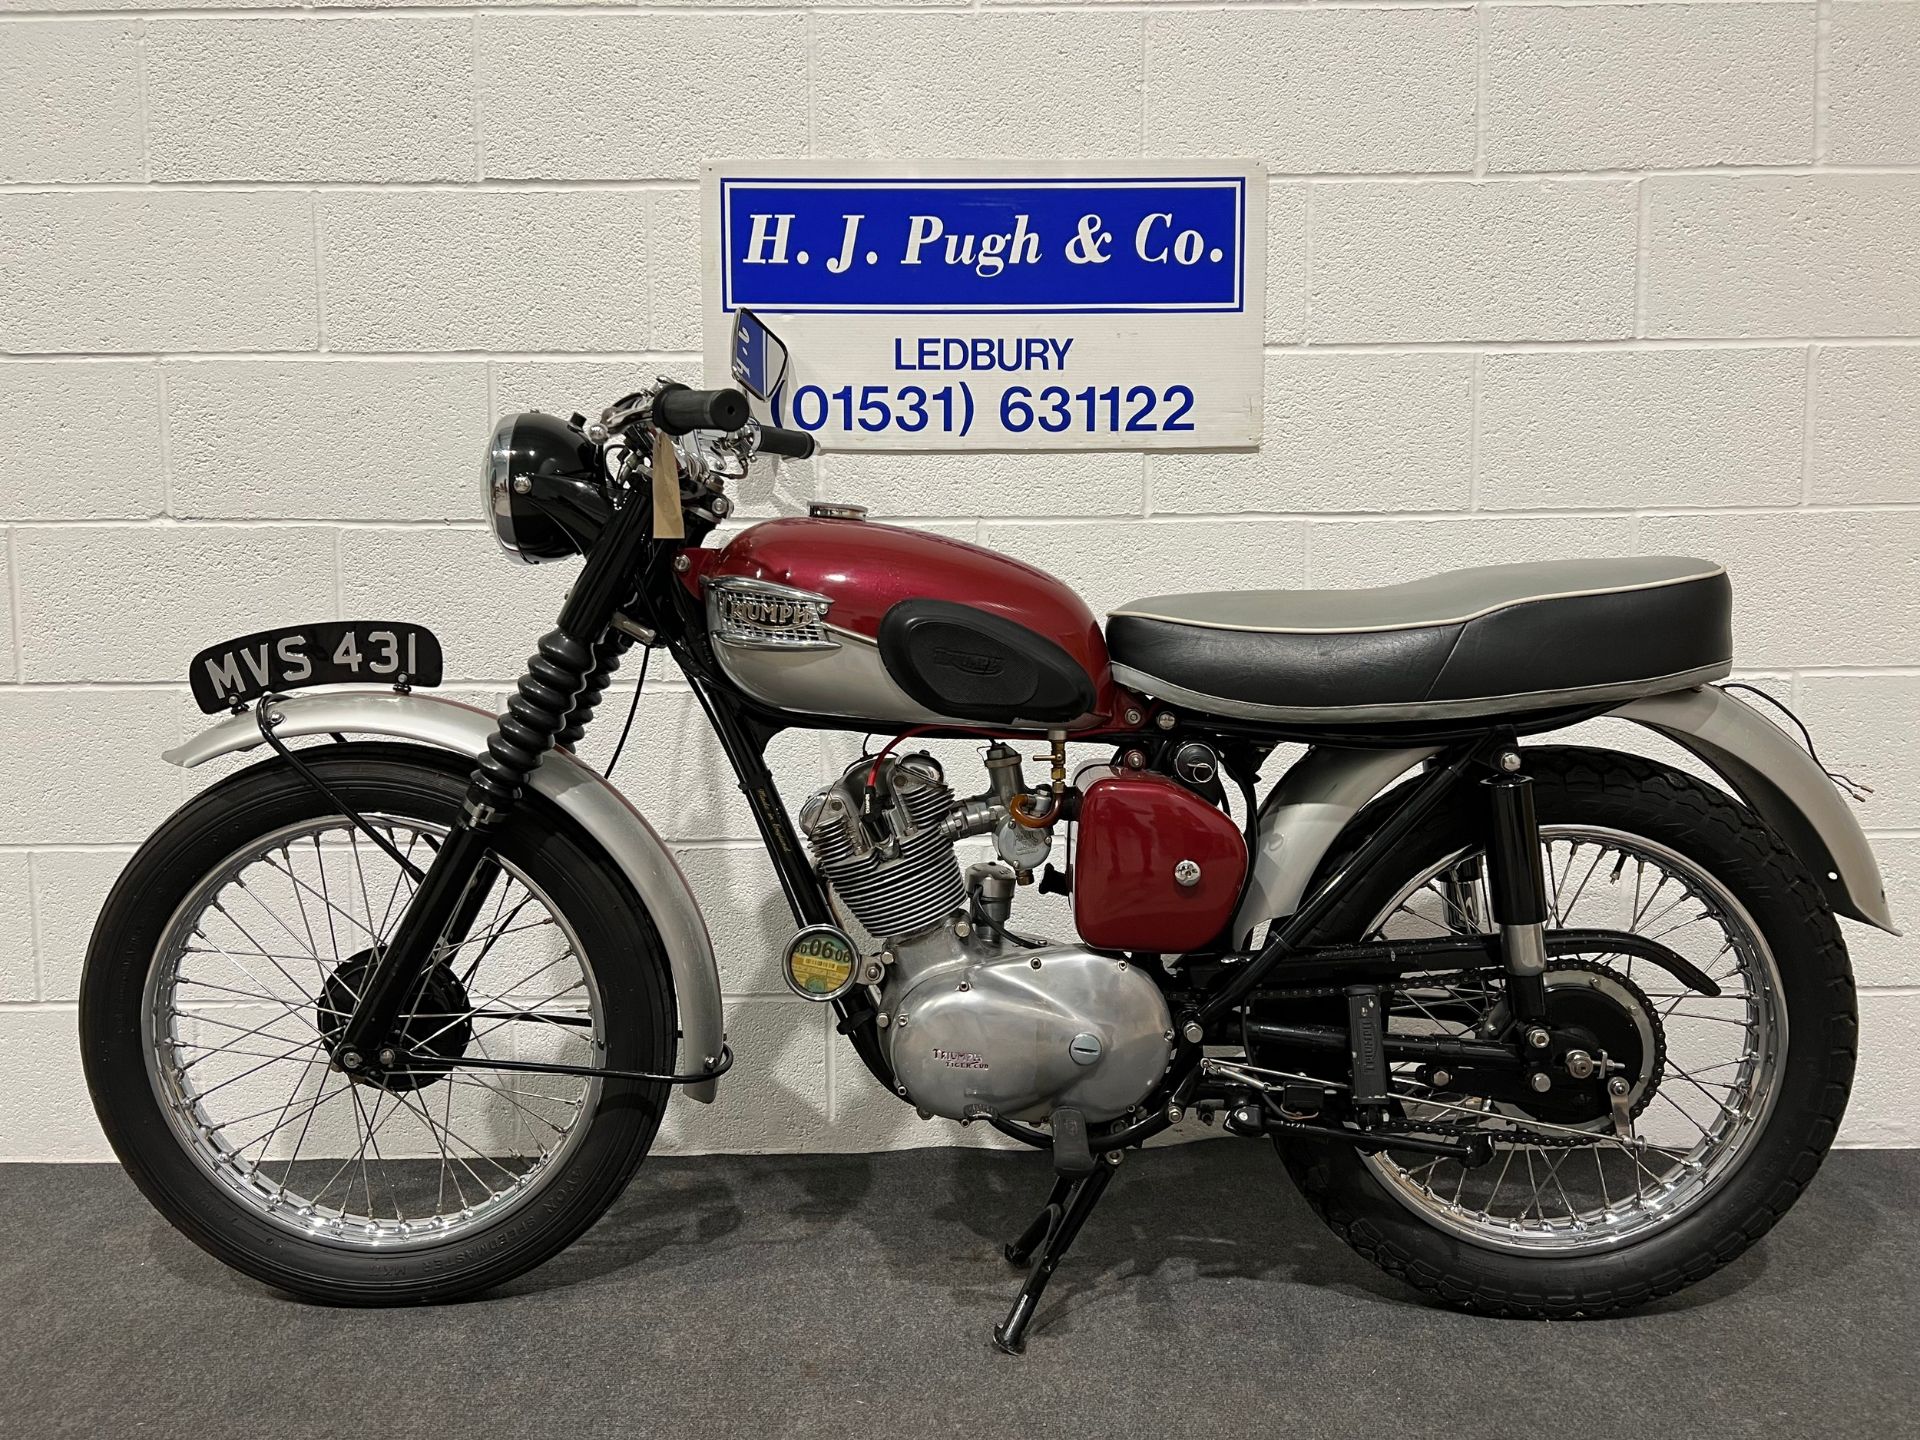 Triumph Tiger cub motorcycle. 1961. 199cc. Frame no. T-76741 Engine no. T2076741 Property of a - Image 5 of 7